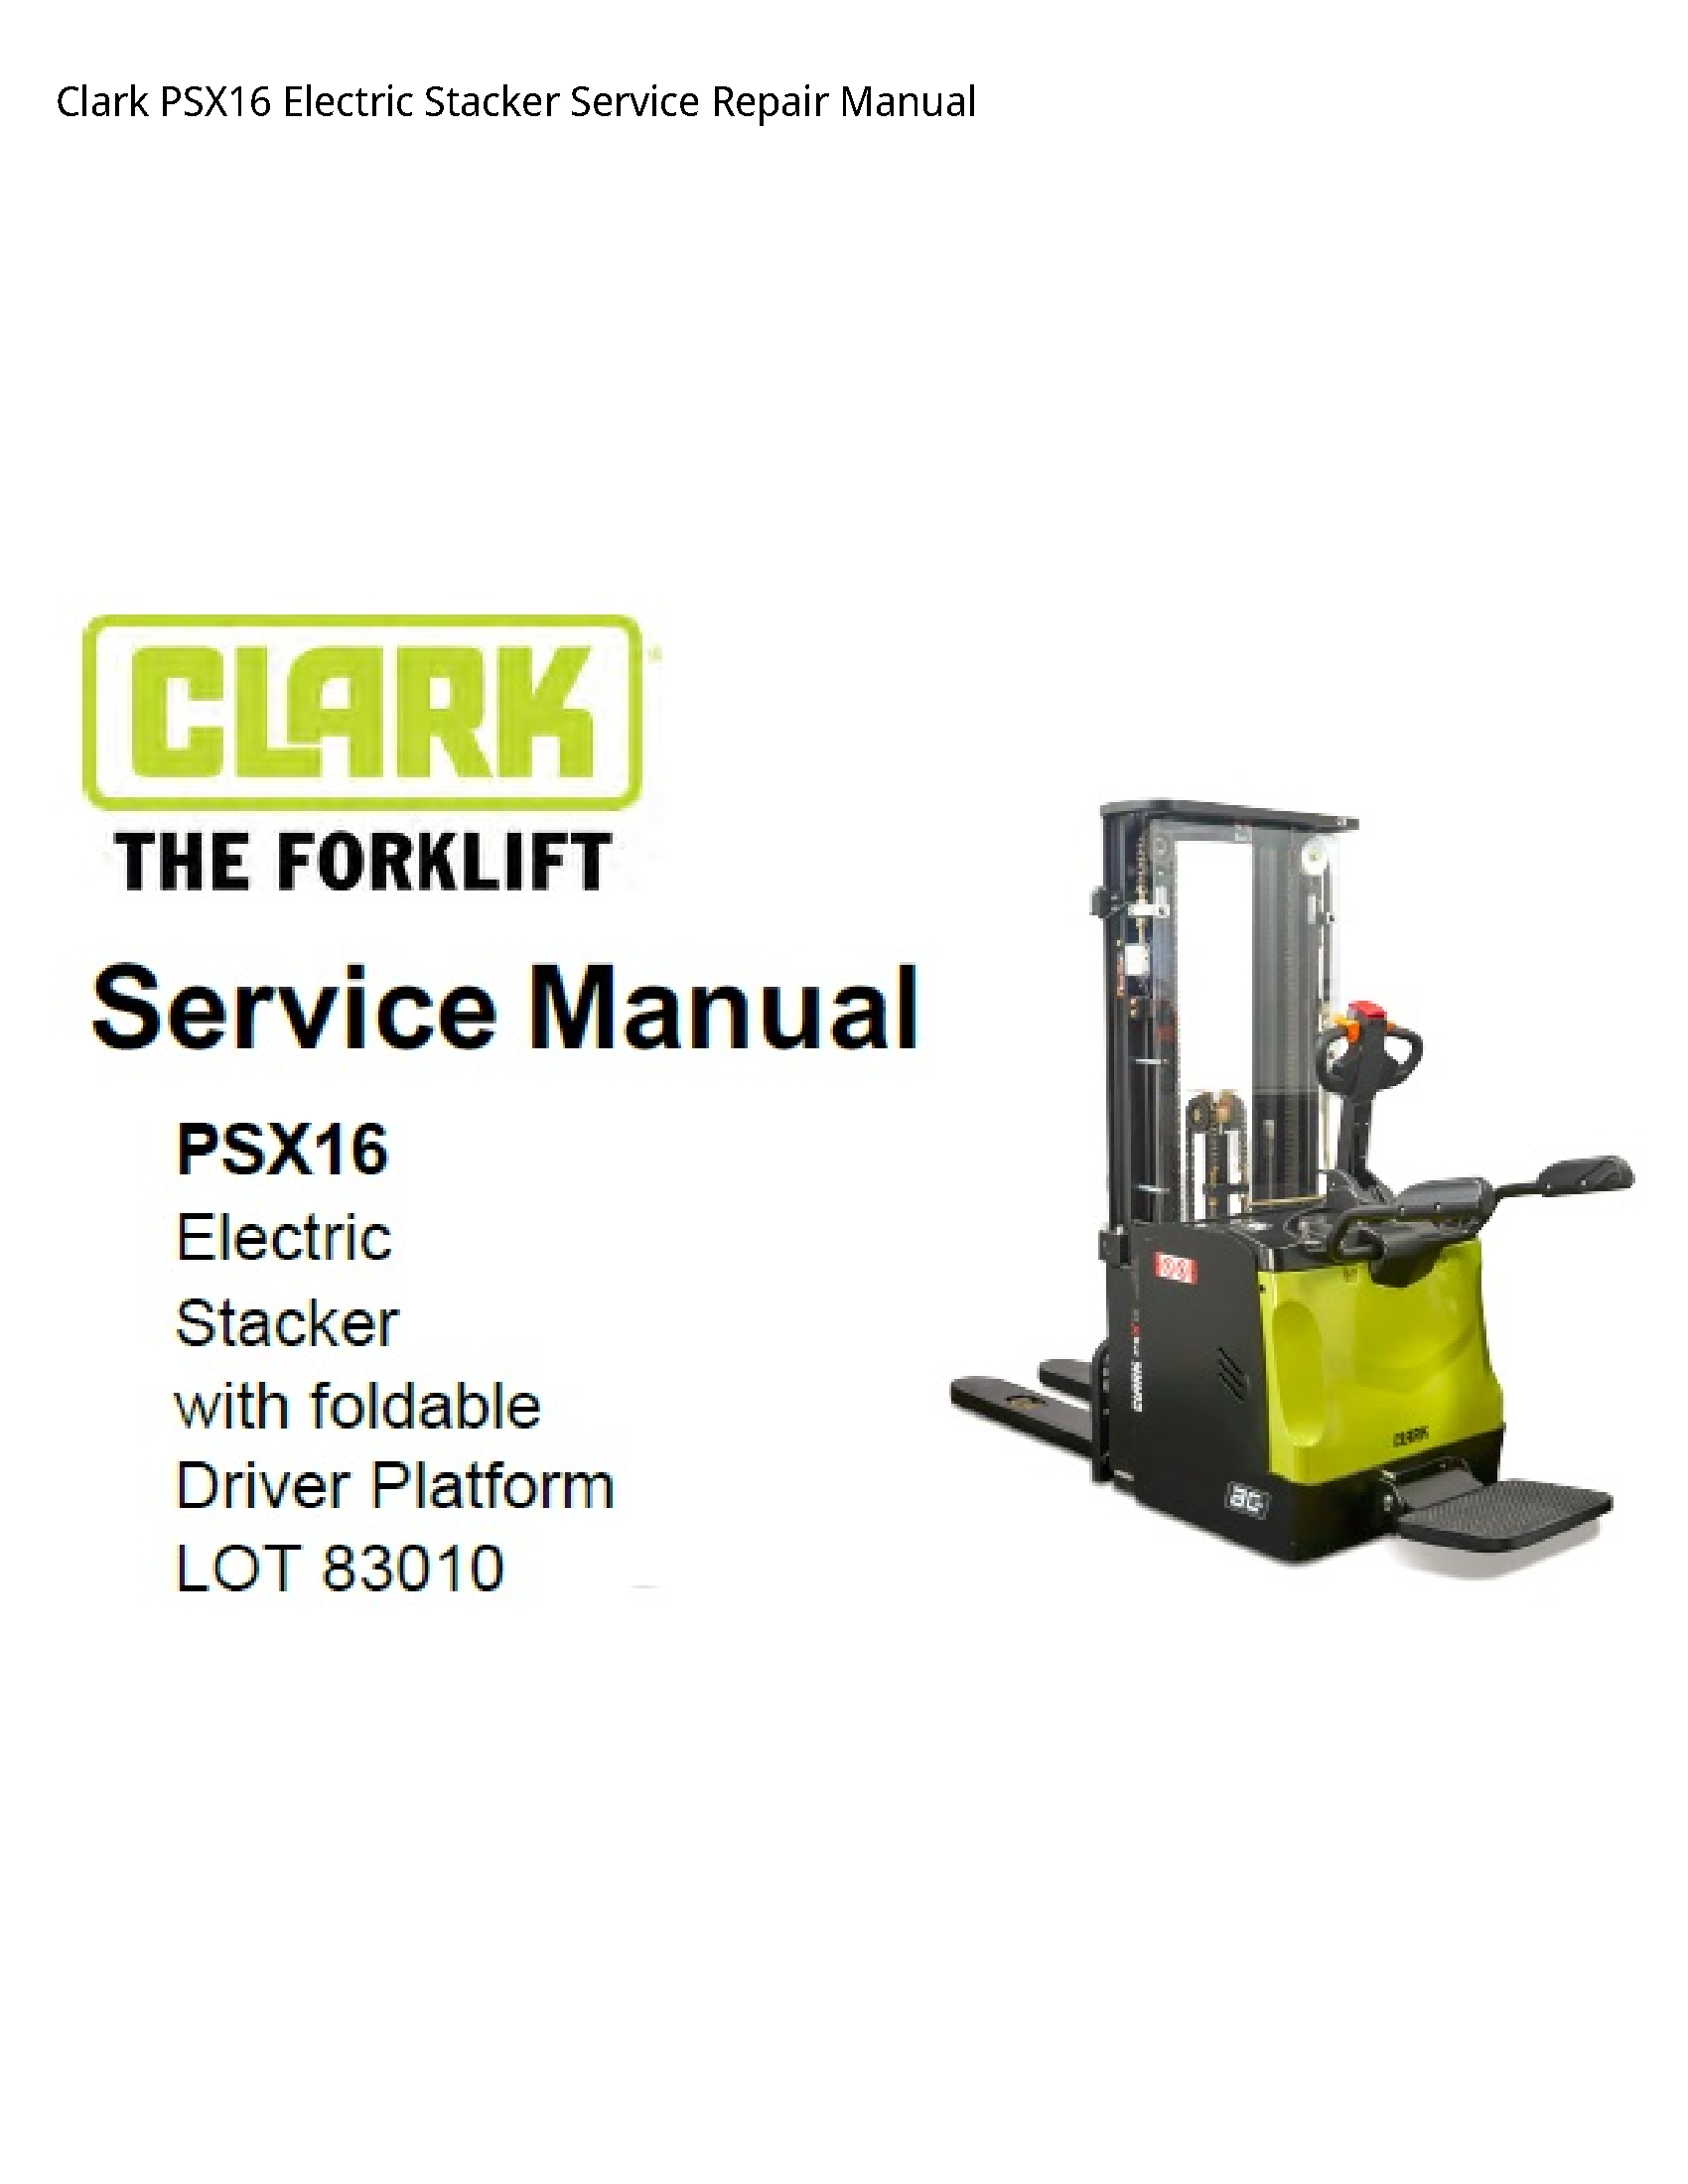 Clark PSX16 Electric Stacker manual